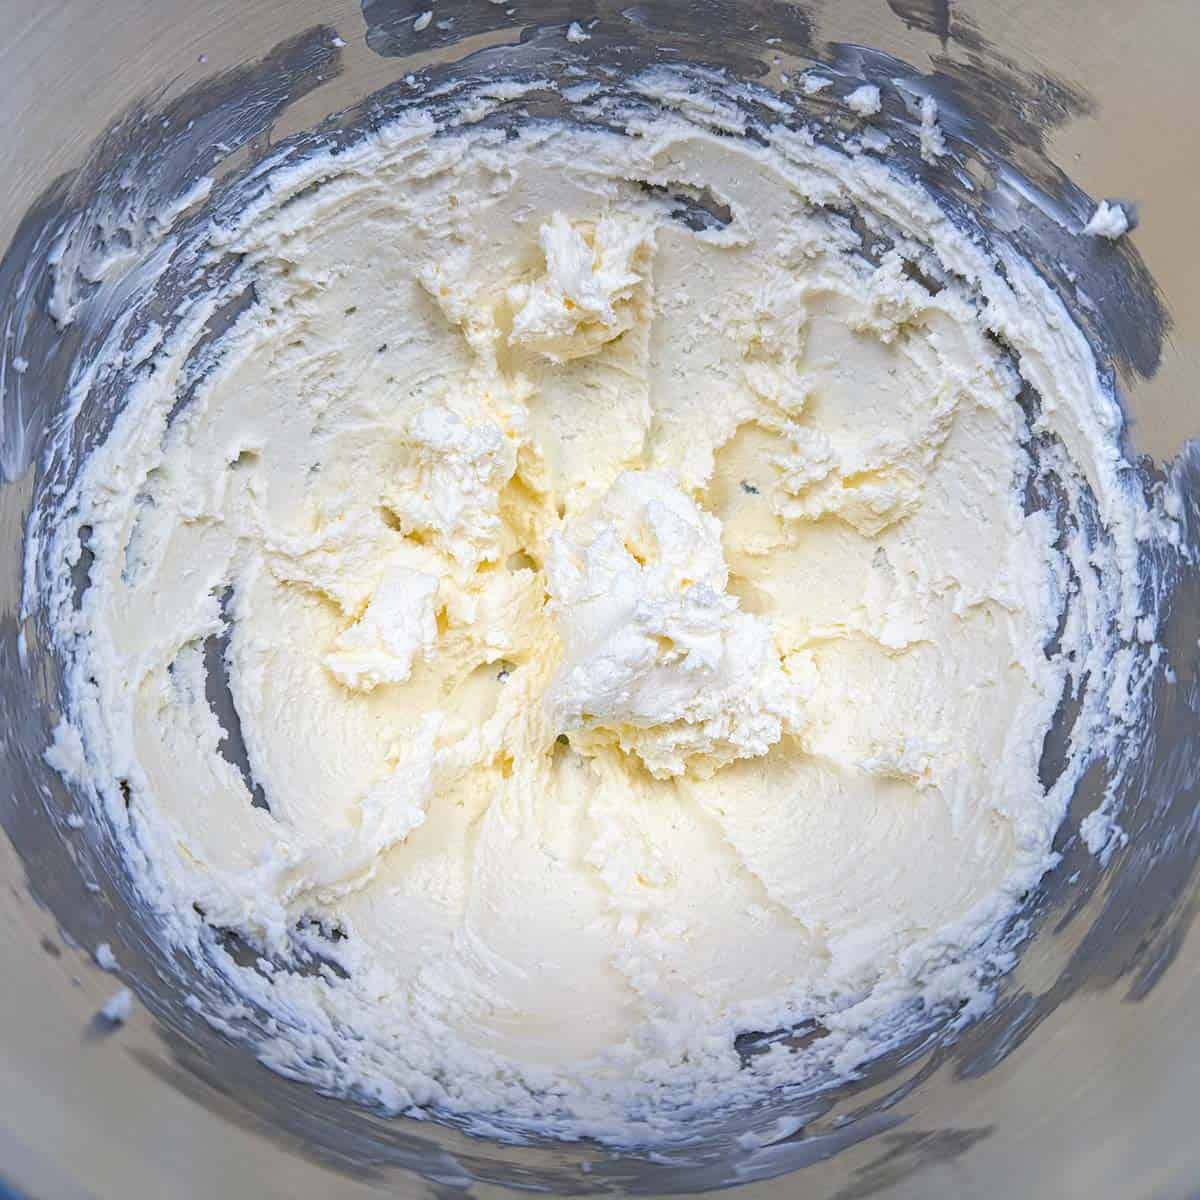 Butter and cream cheese mixed.